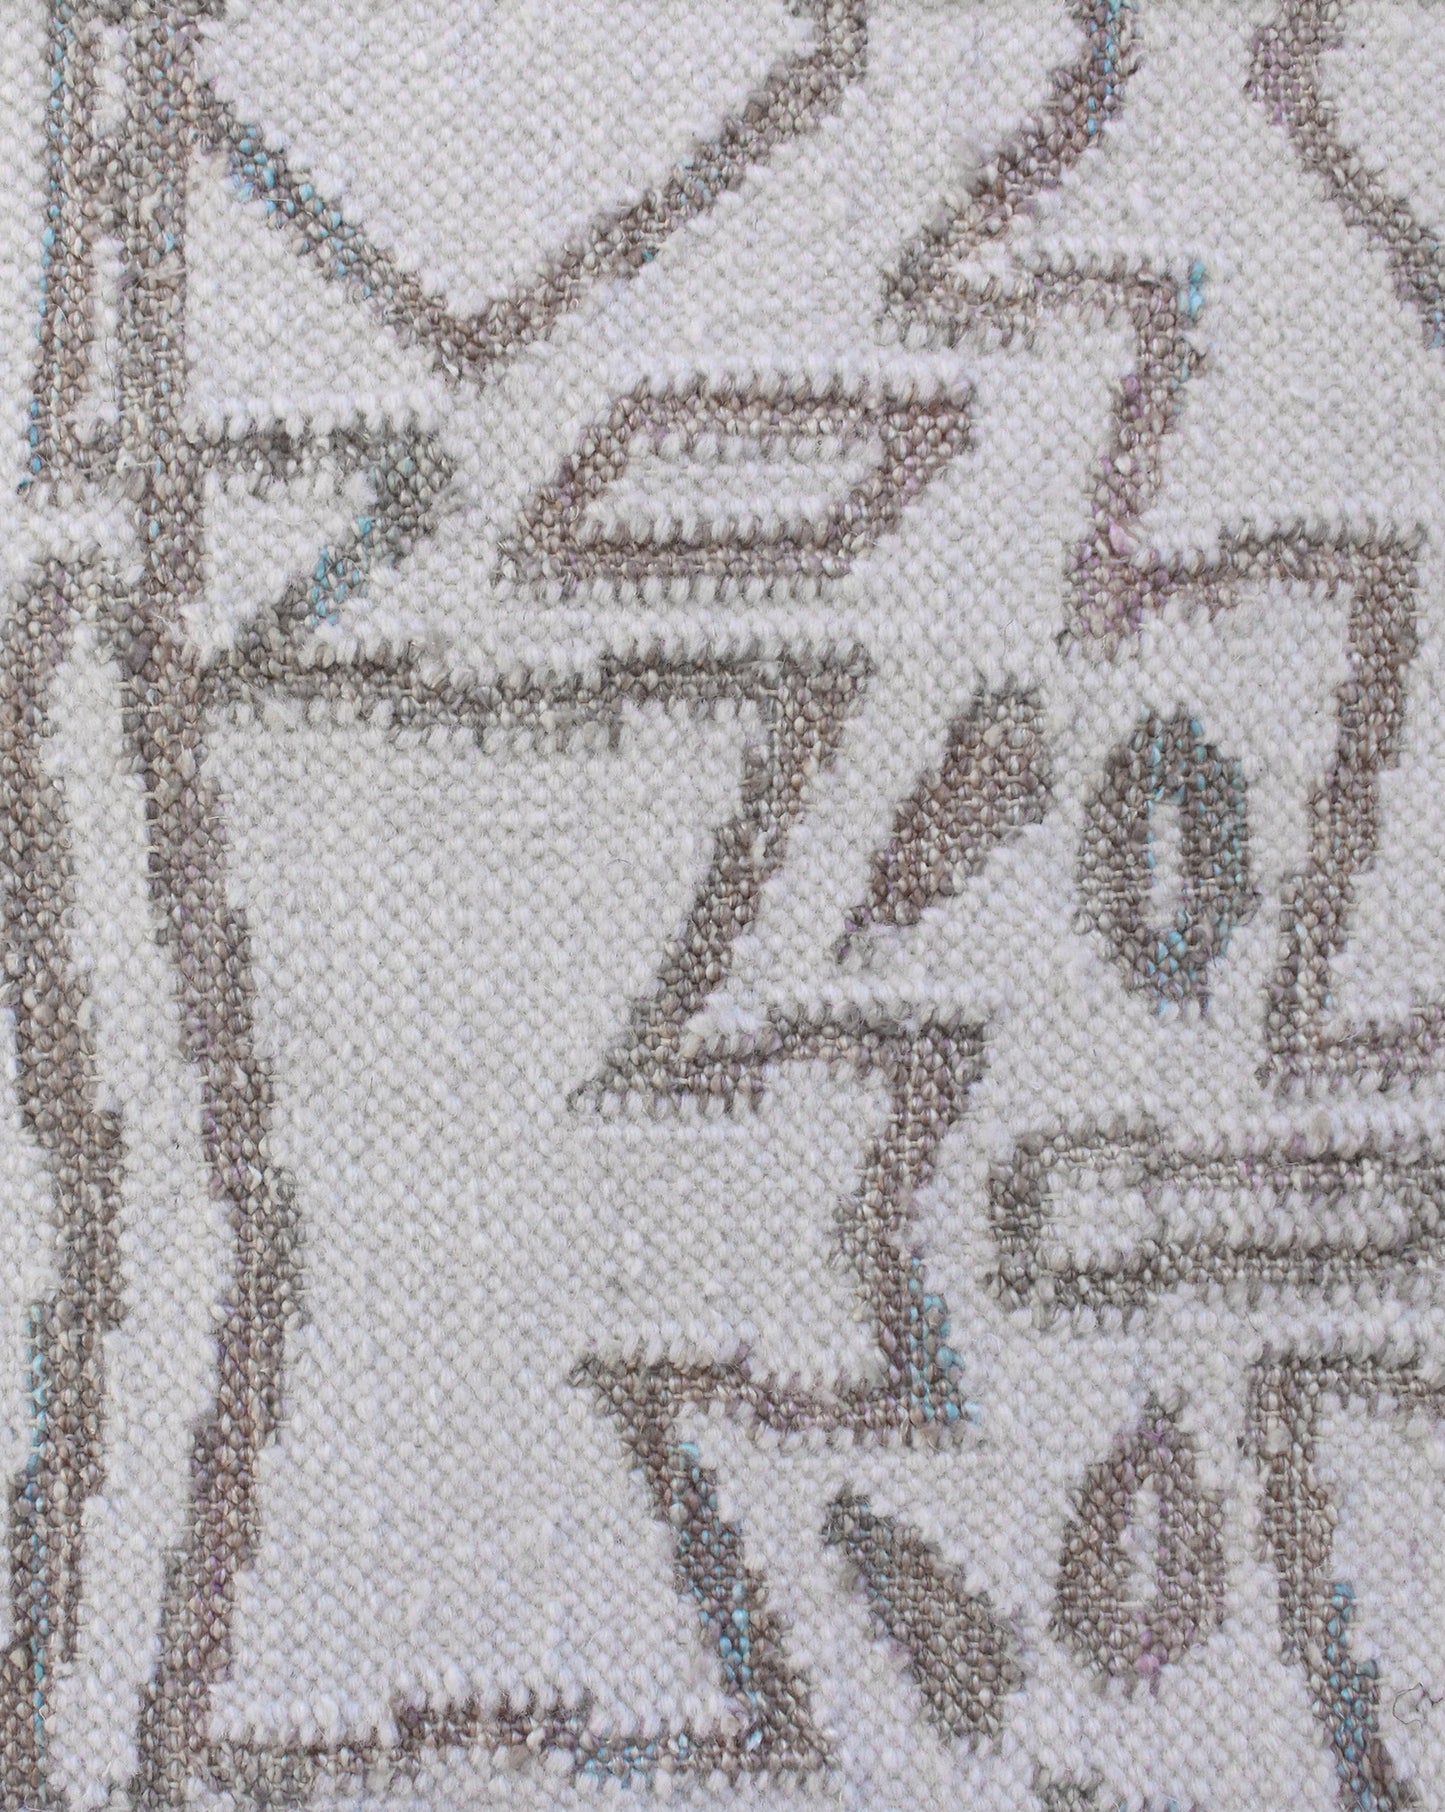 A close up of the Akimbo Flatweave Rug with a geometric pattern